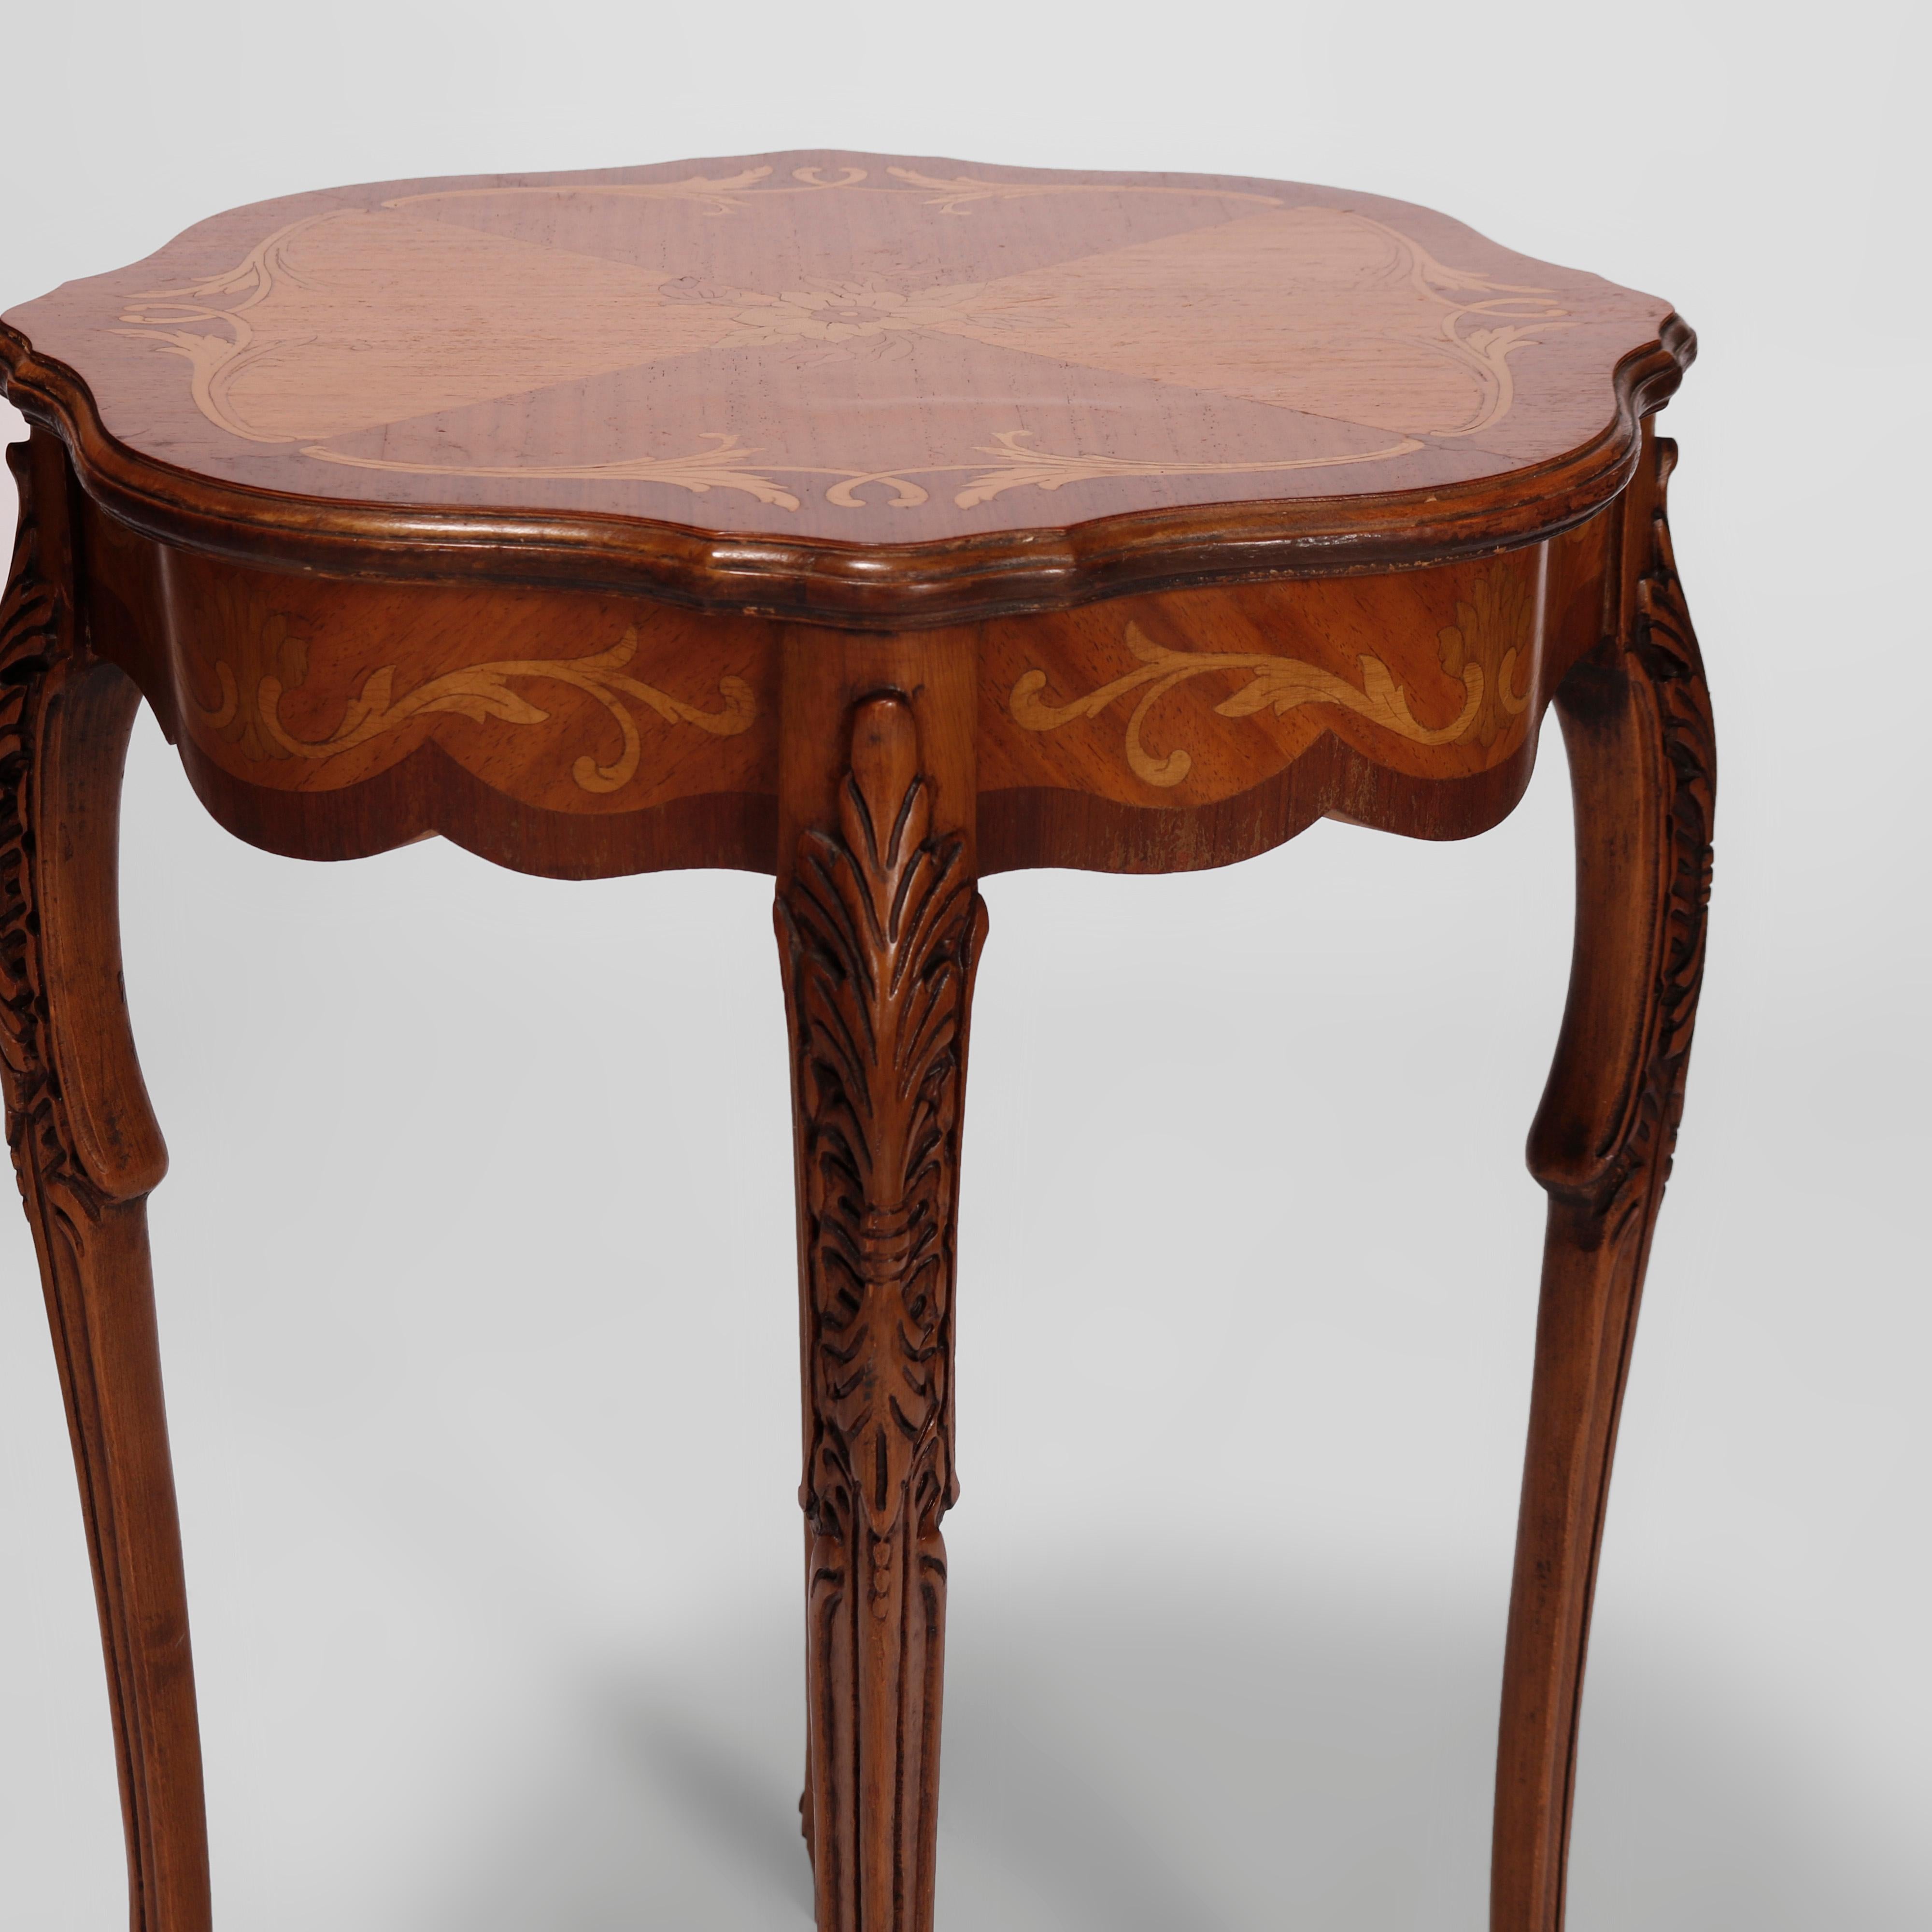 Antique French Carved Mahogany Satinwood Inlaid Marquetry Side Tables c1930 6